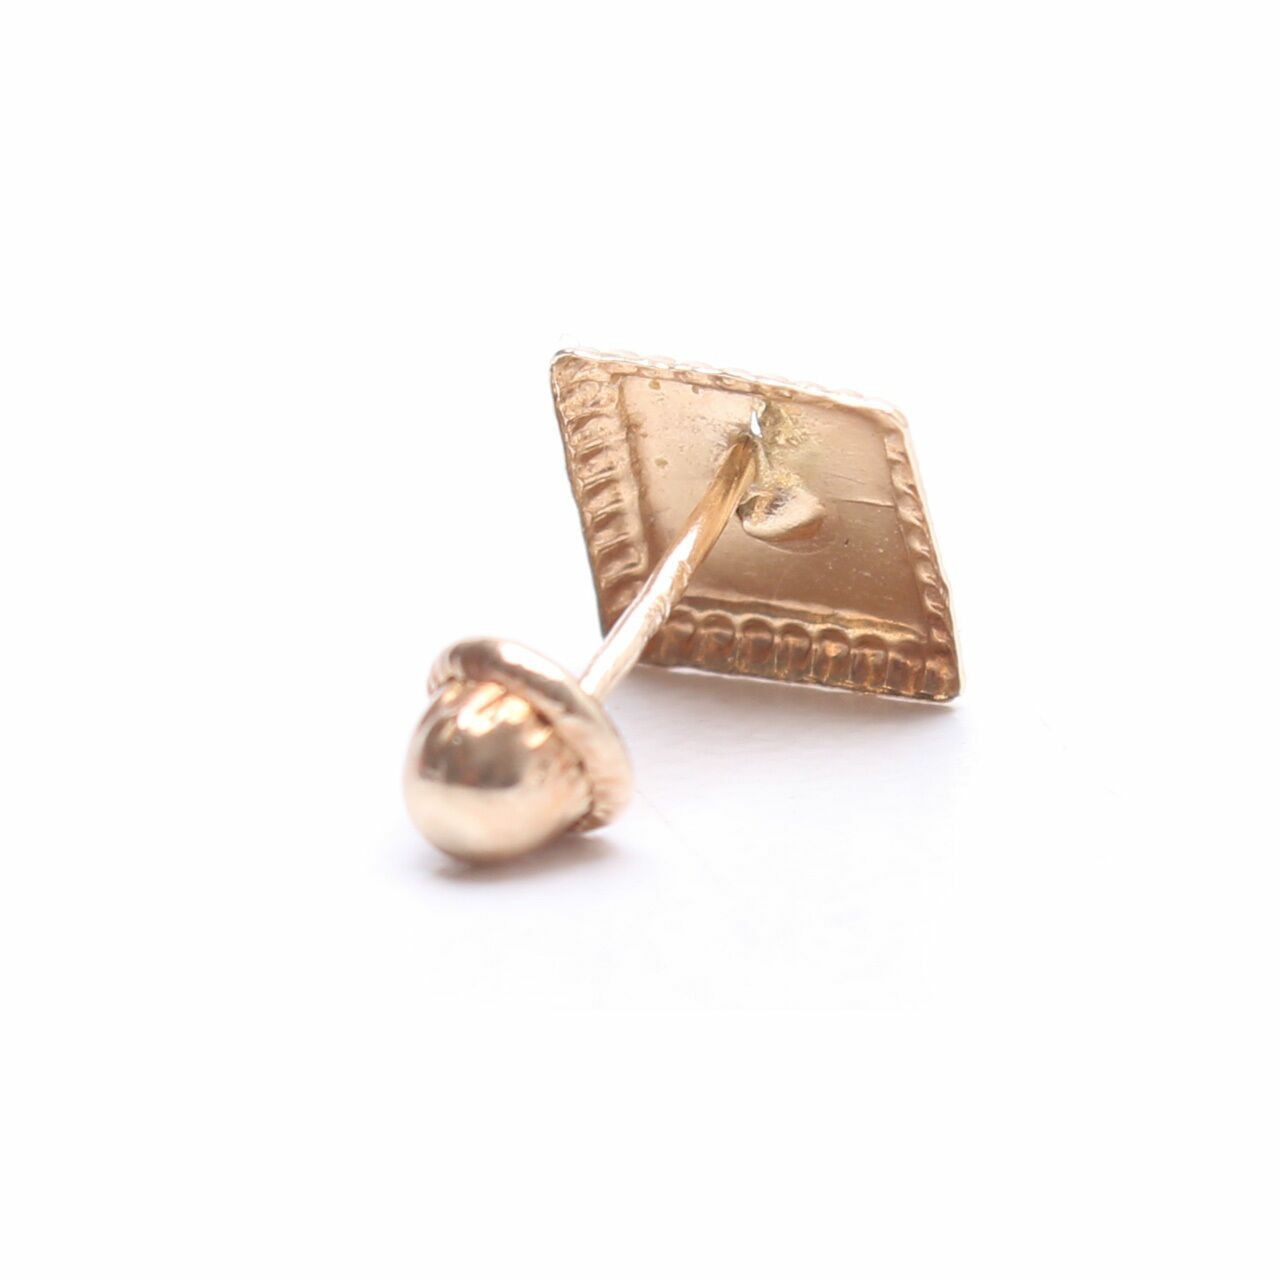 From Tiny Island Gold Man Earrings